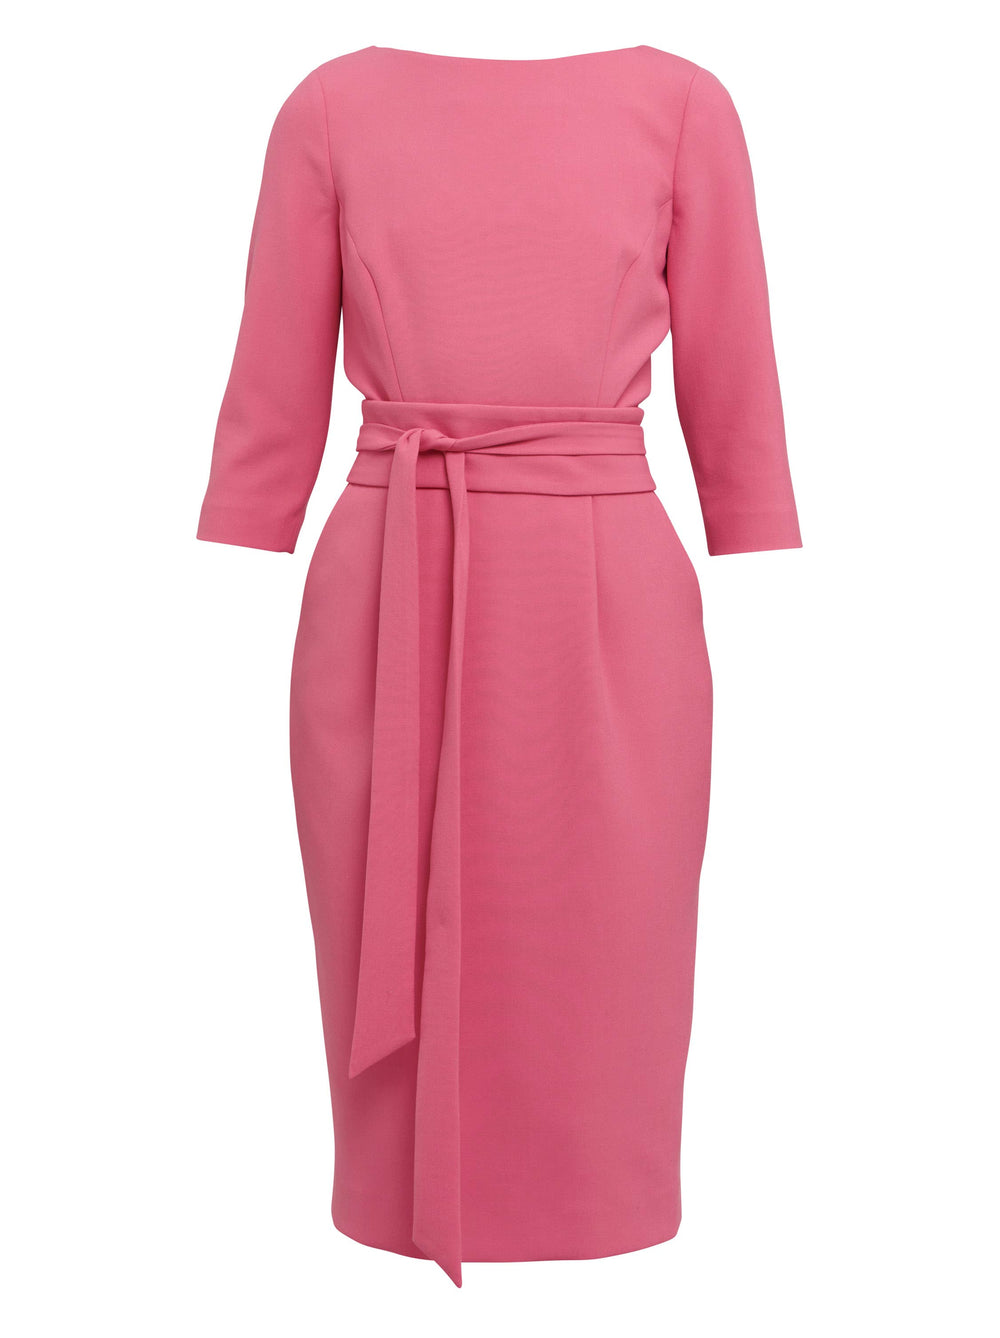 Obi is an update on our best-selling Caroline silhouette. A simple yet flattering slash neckpiece with a pencil skirt that falls just below the knee with handy side pockets that lend a sense of ease. This rose-toned dress can be styled with or without the matching belt. Attending a summer wedding? Mother of the bride? Heading to the races? This is the dress for you.